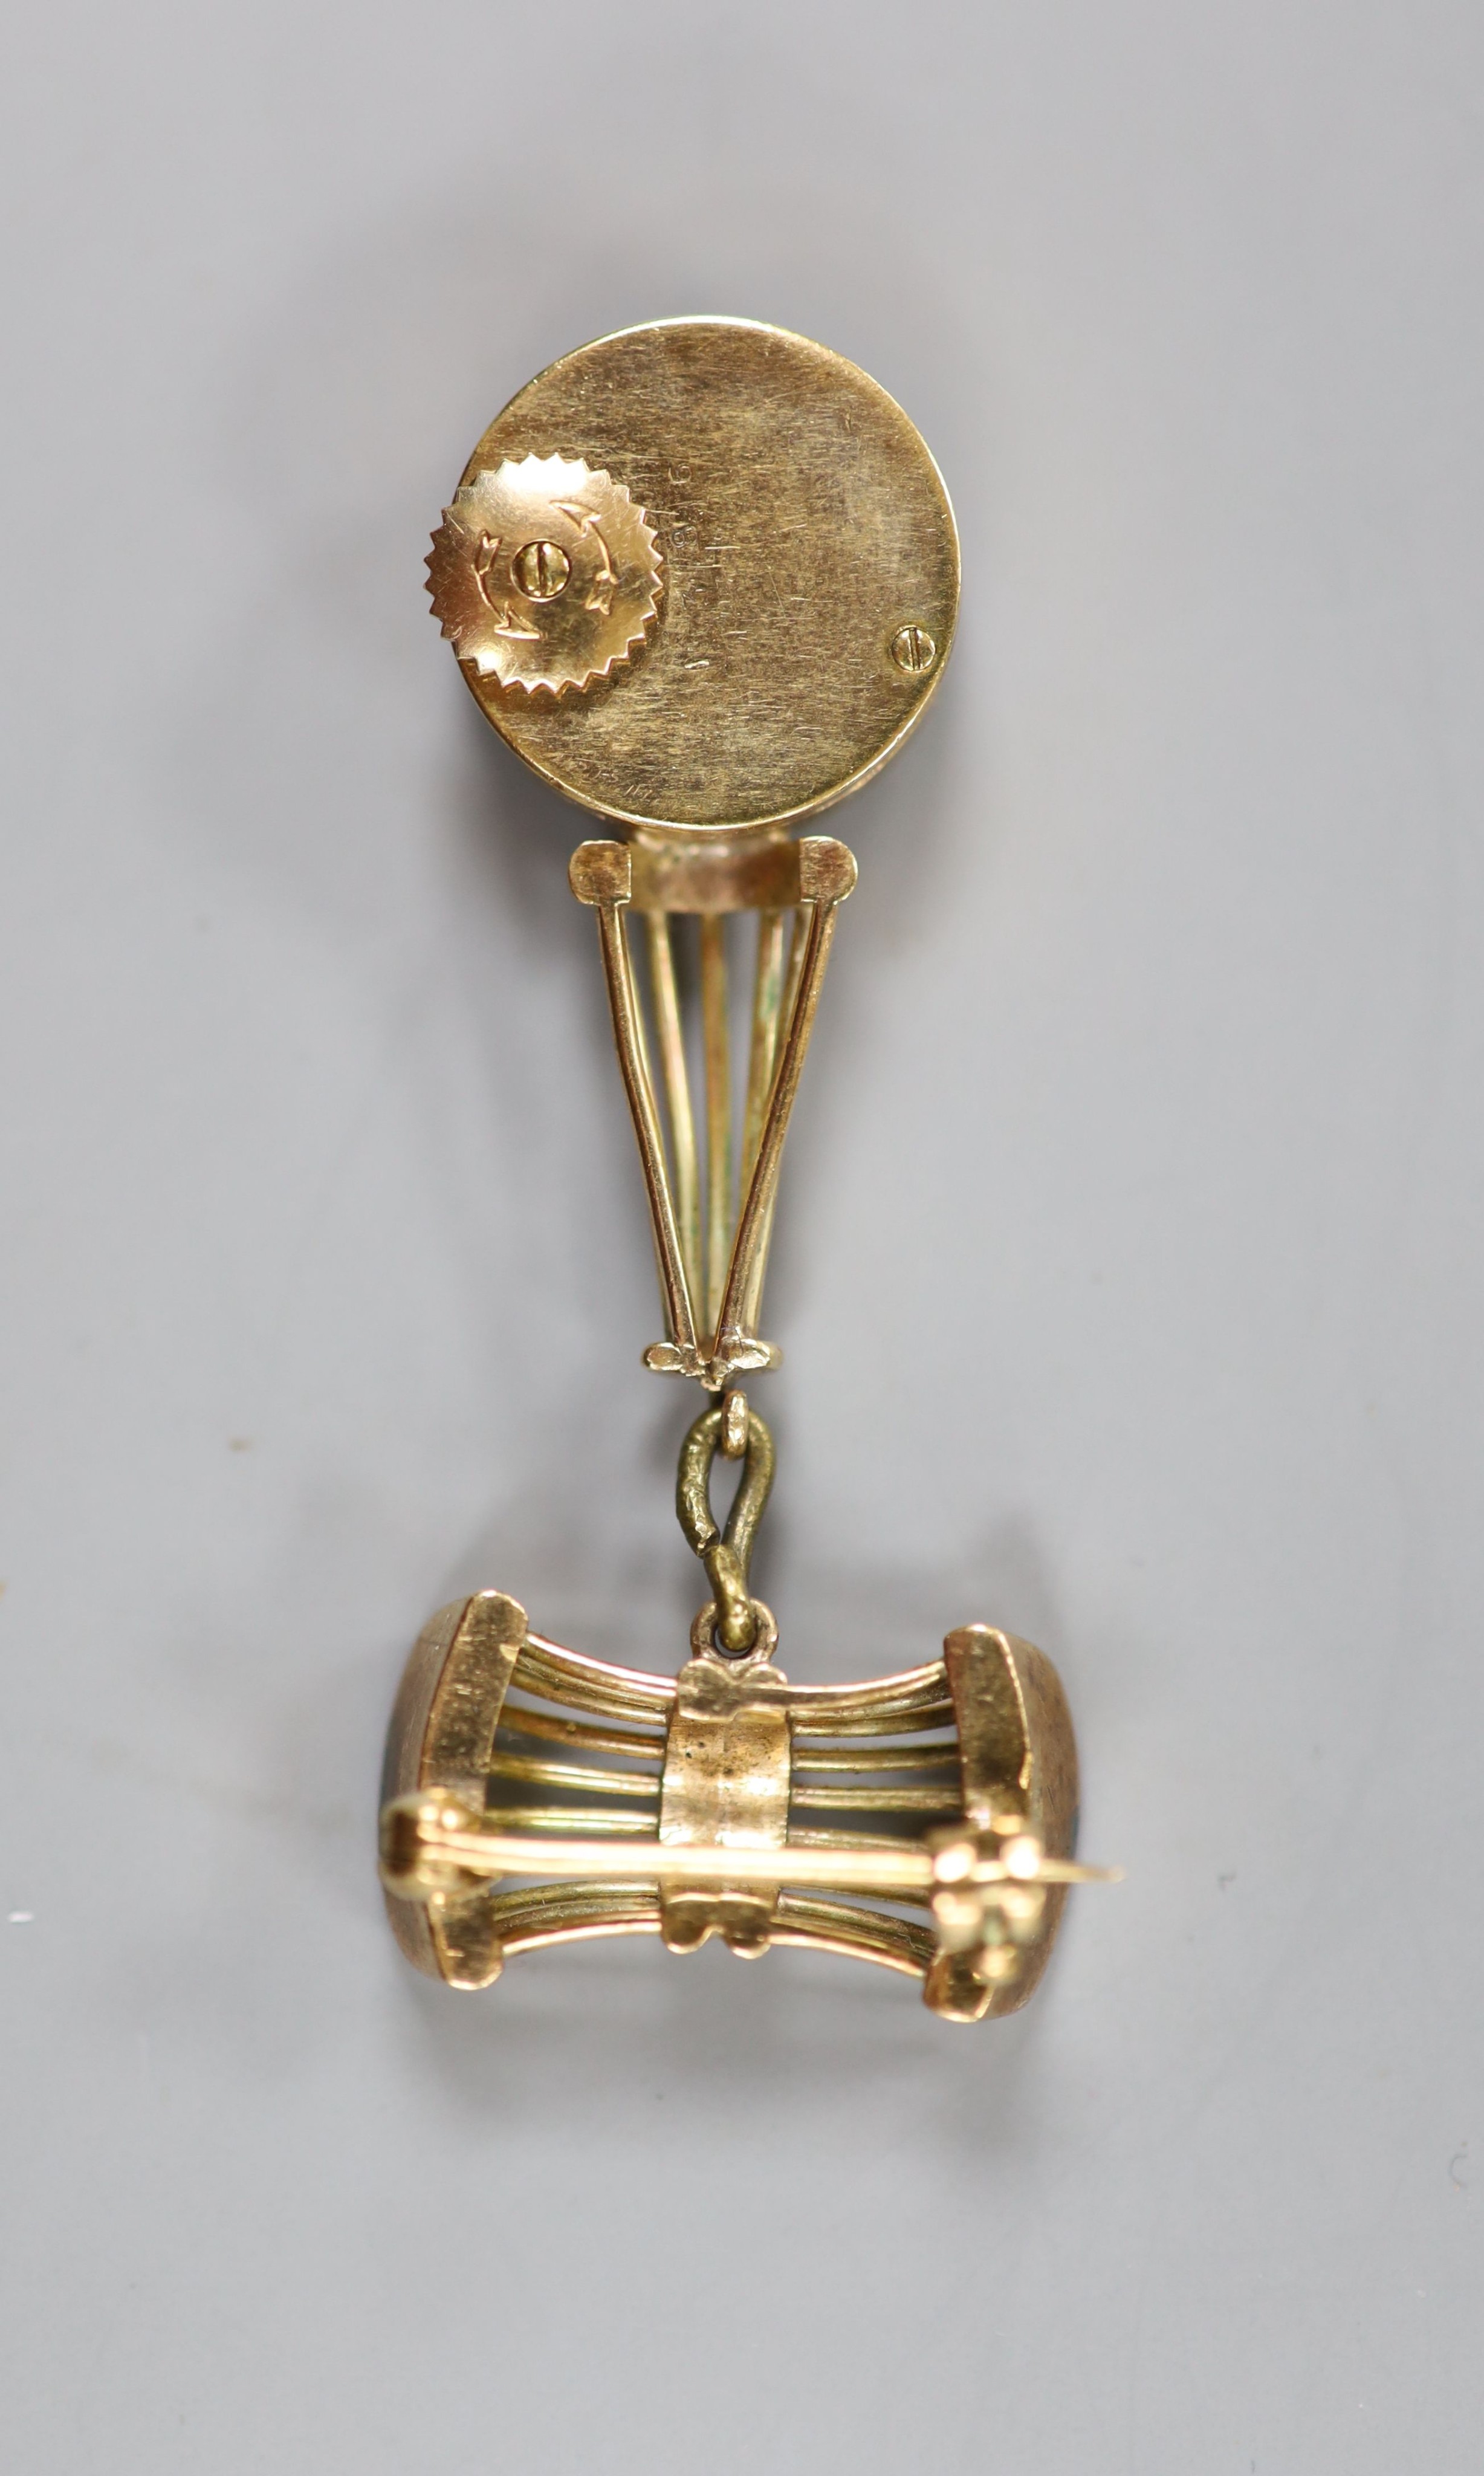 A lady's 9ct gold Jaeger LeCoultre manual back wind pendant watch on a 9ct gold suspension brooch, overall 50mm, gross weight 13.3 grams, case diameter 16mm, in fitted Jaeger LeCoultre box.